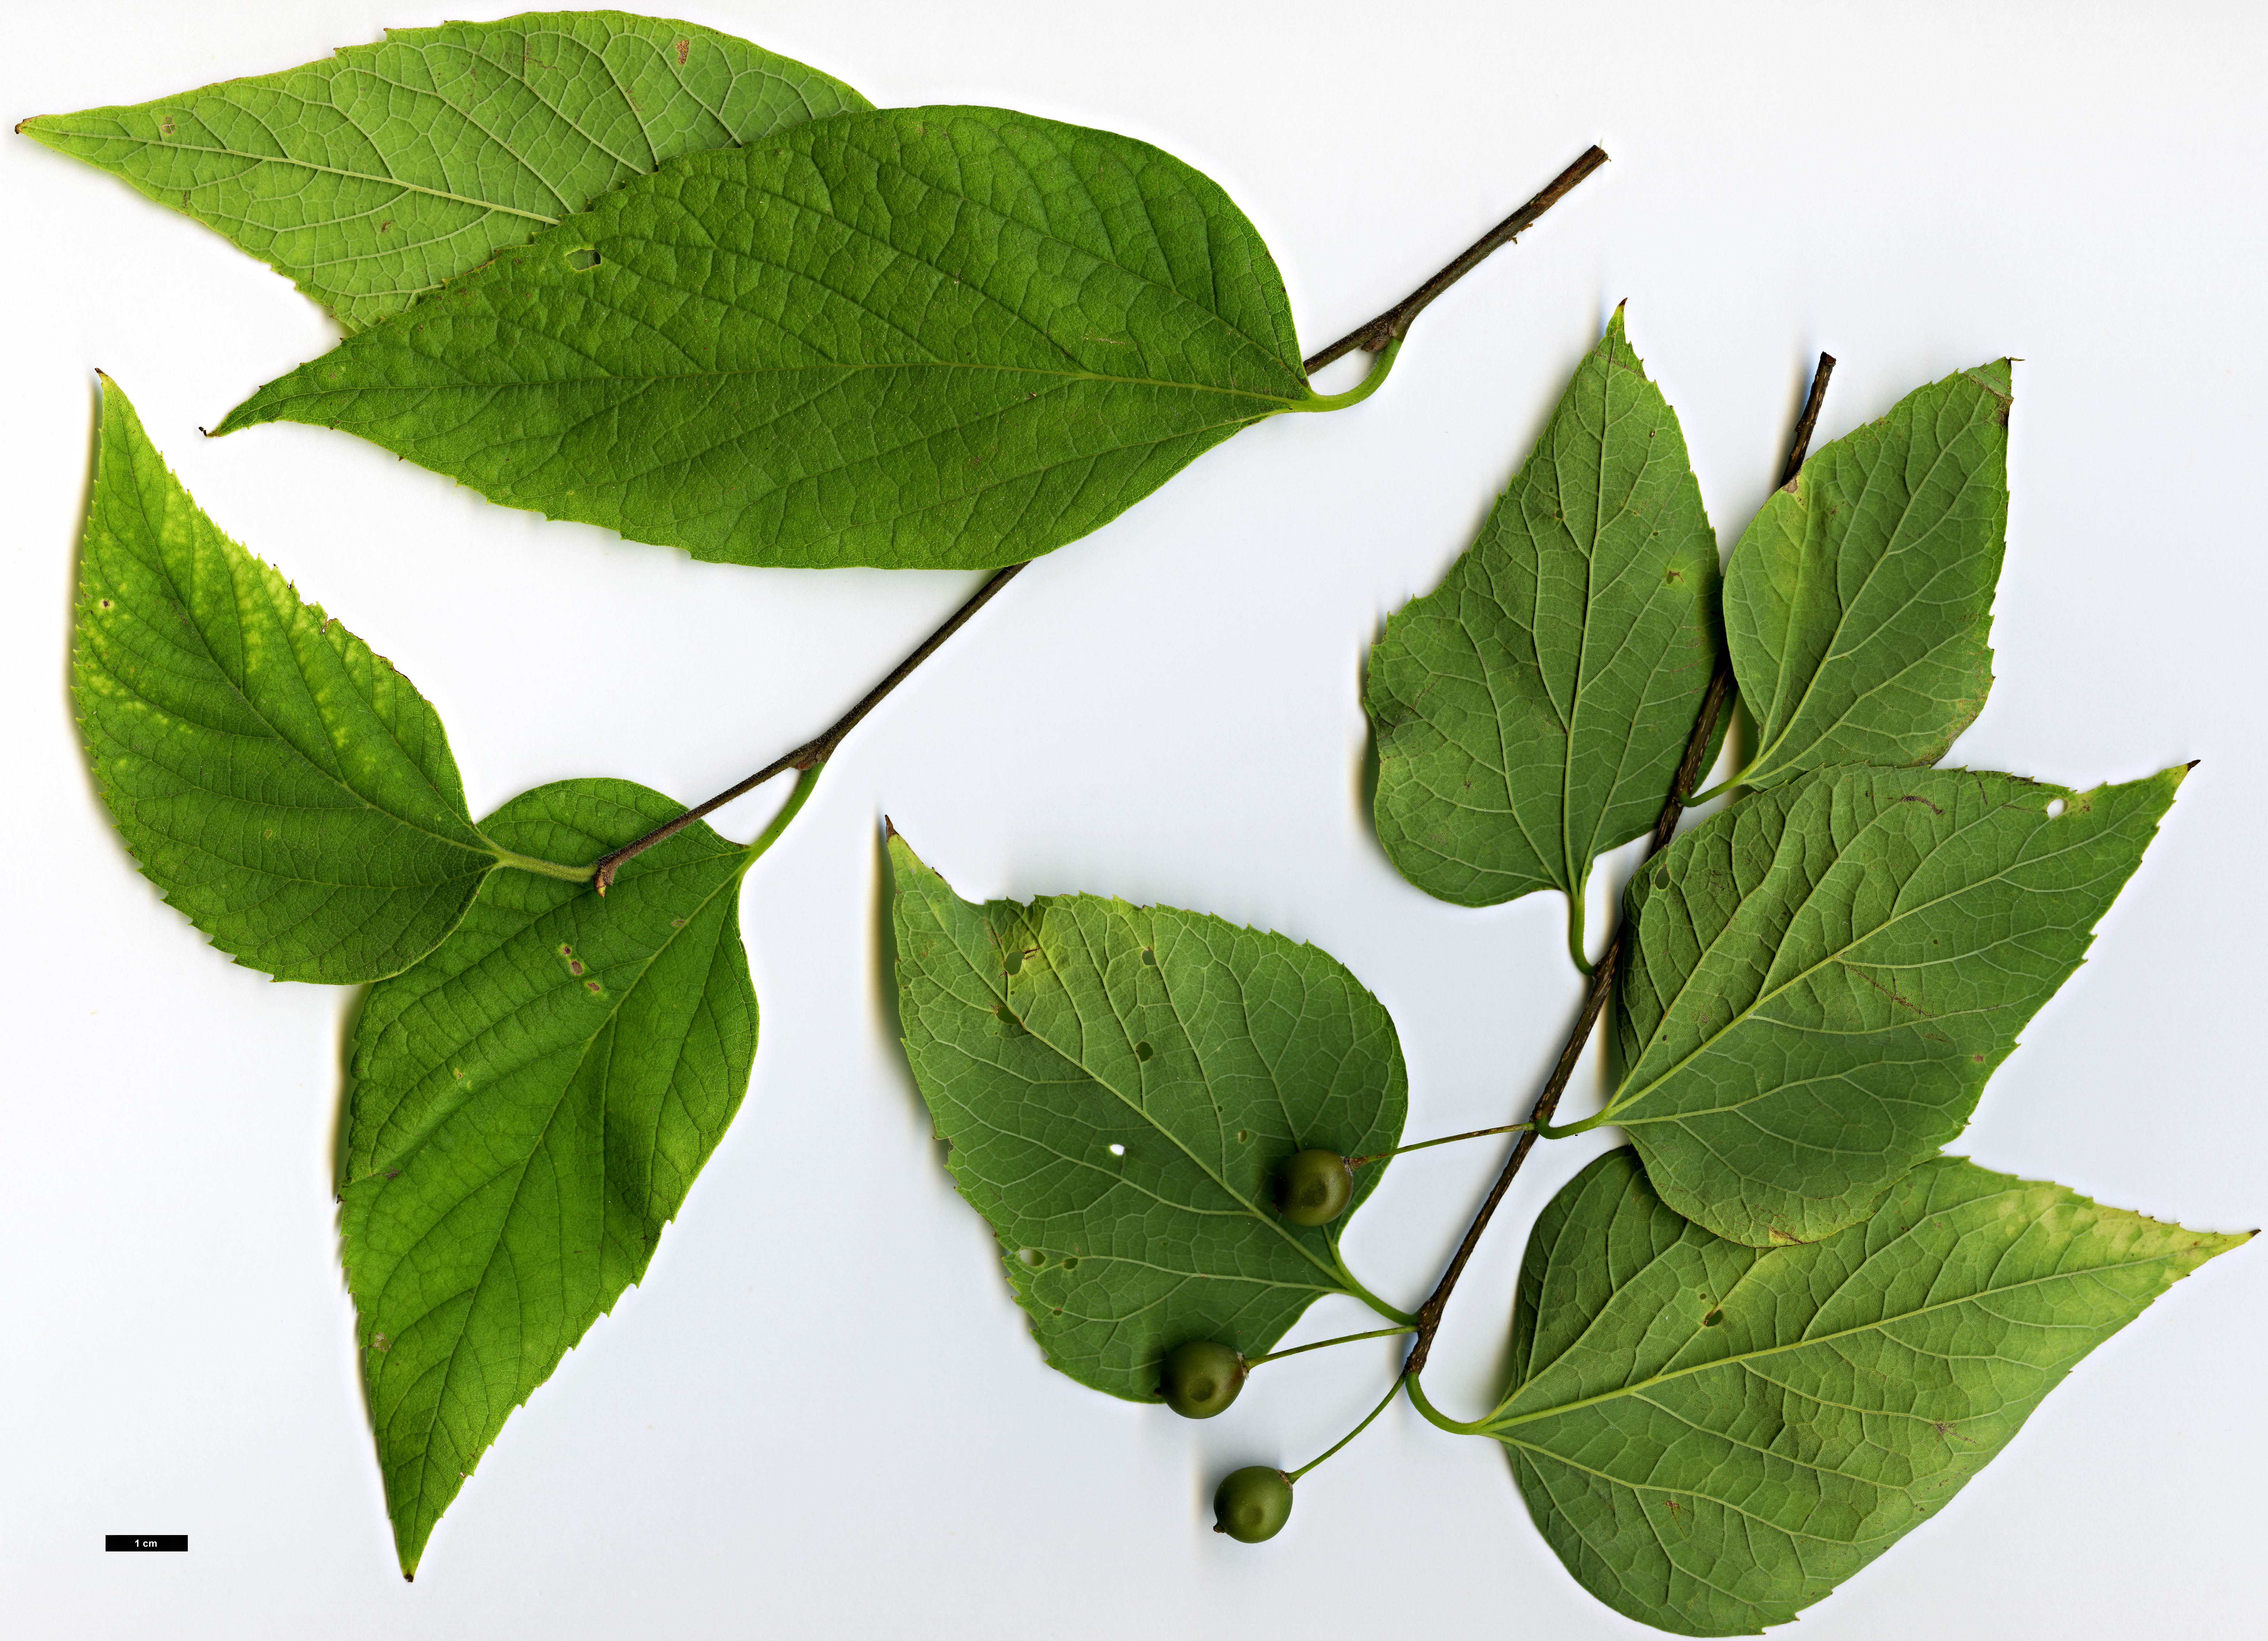 High resolution image: Family: Cannabaceae - Genus: Celtis - Taxon: occidentalis